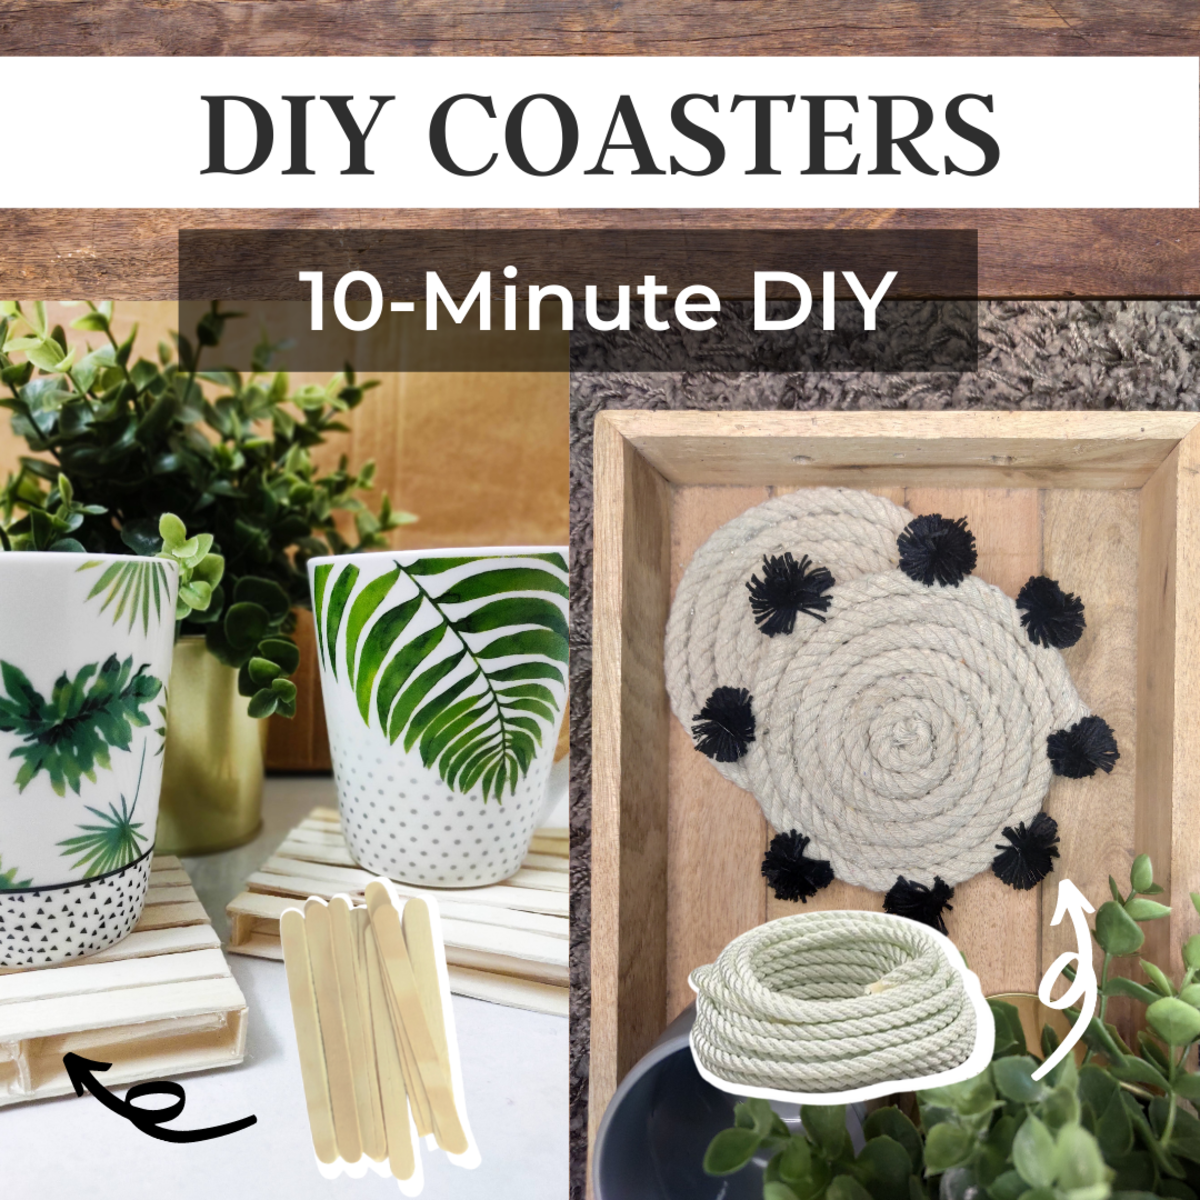 2-Easy and Budget Friendly DIY Coasters Projects (With Video Tutorials)